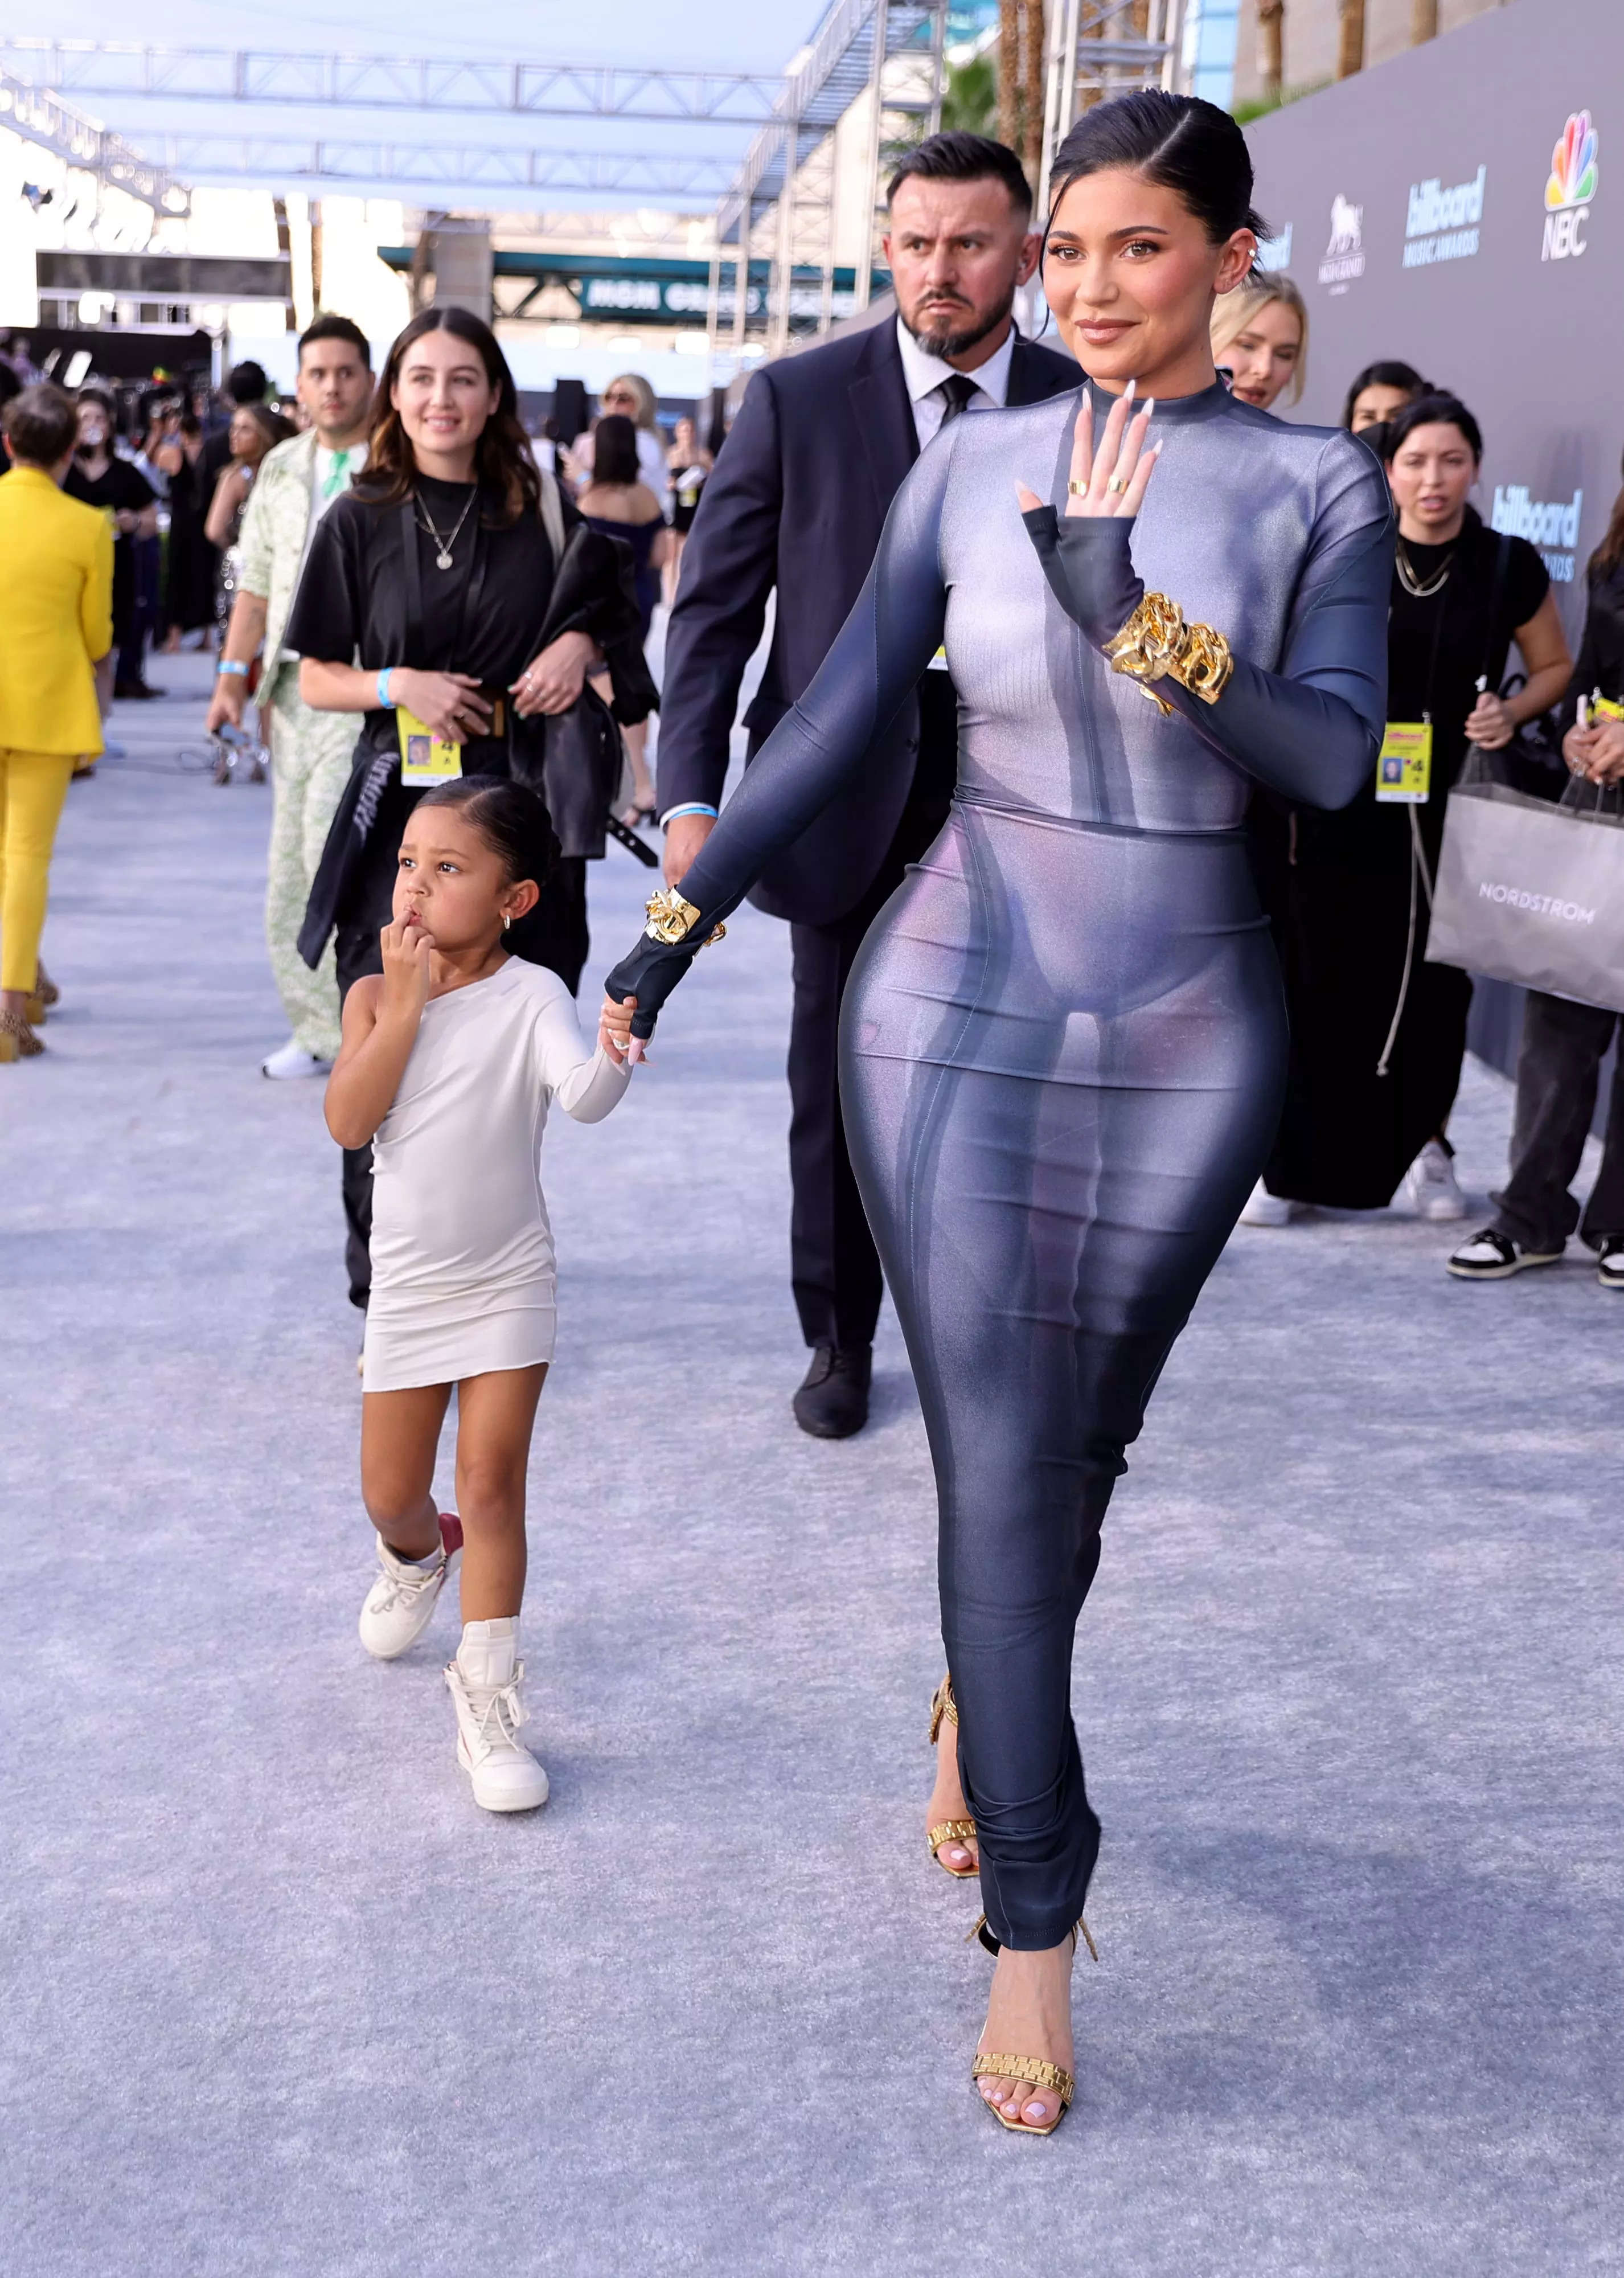 Kylie Jenner, Travis Scott, and their daughter Stormi returned to the red carpet as a family at the Billboard Music Awards